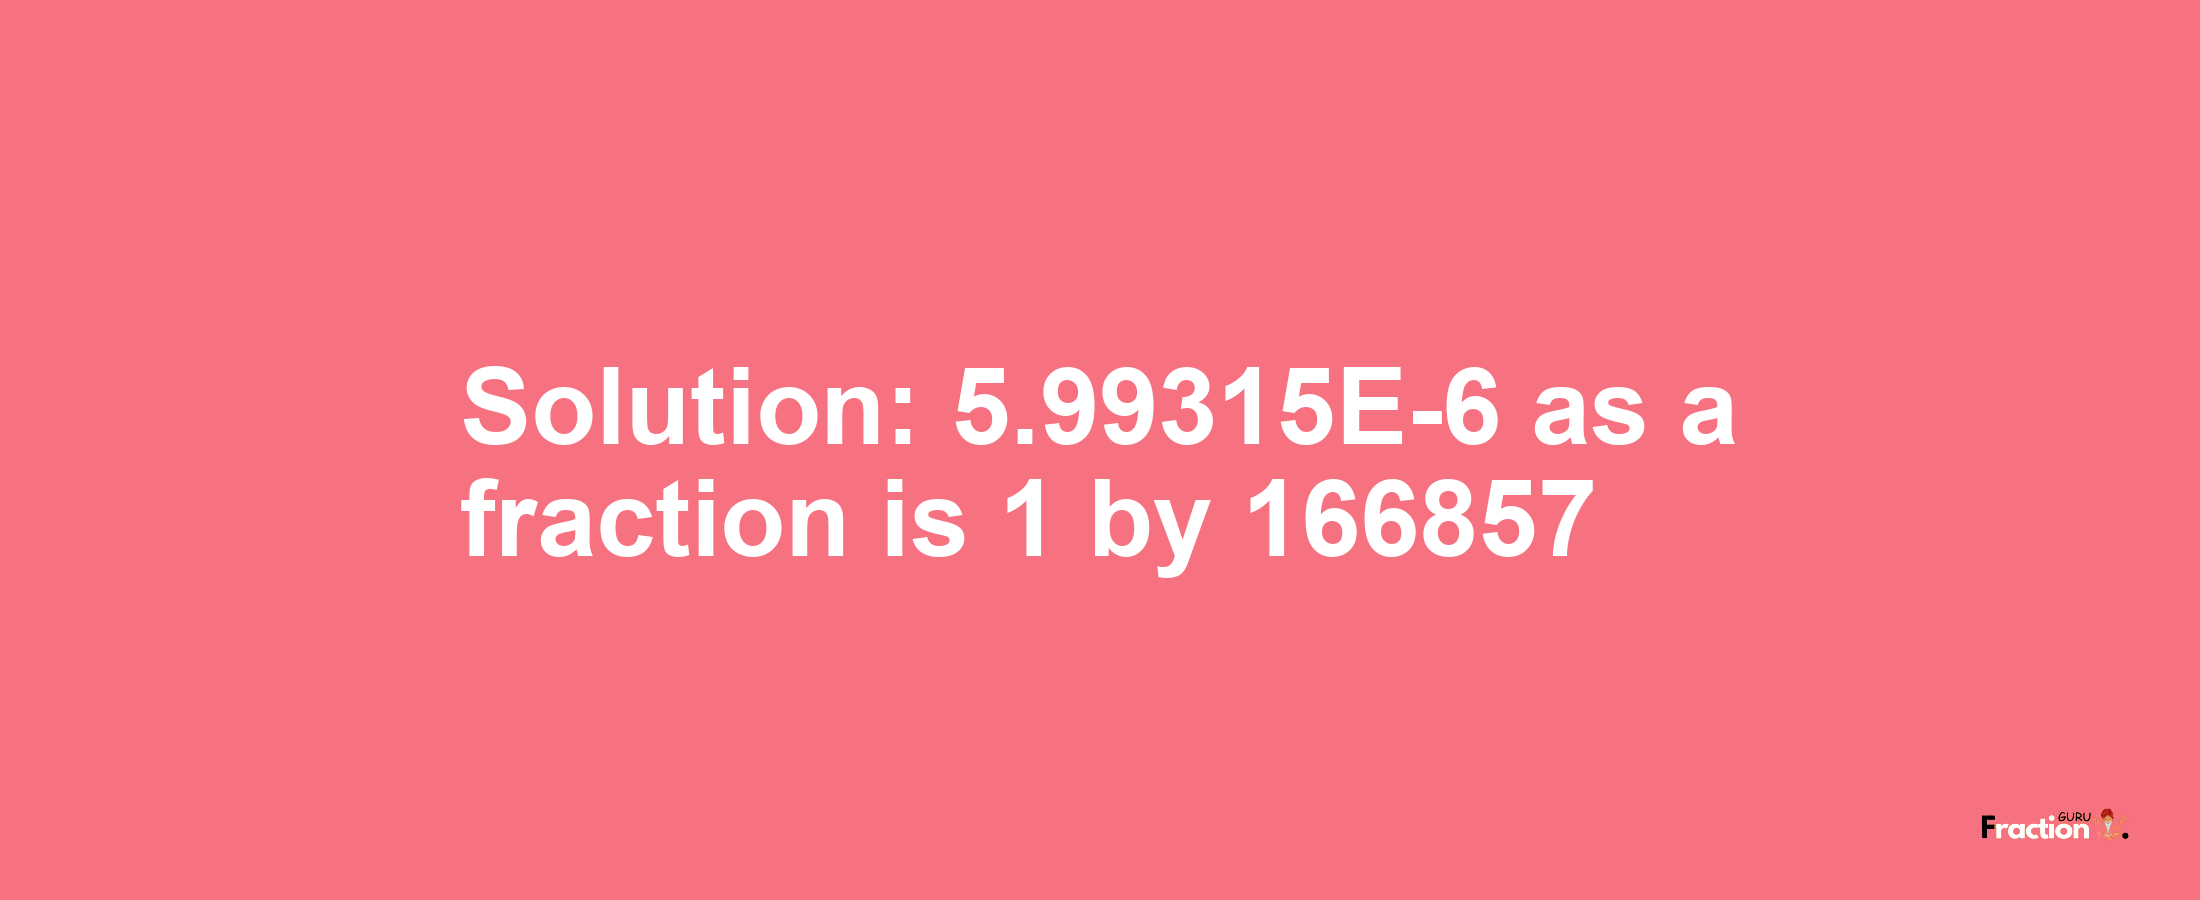 Solution:5.99315E-6 as a fraction is 1/166857